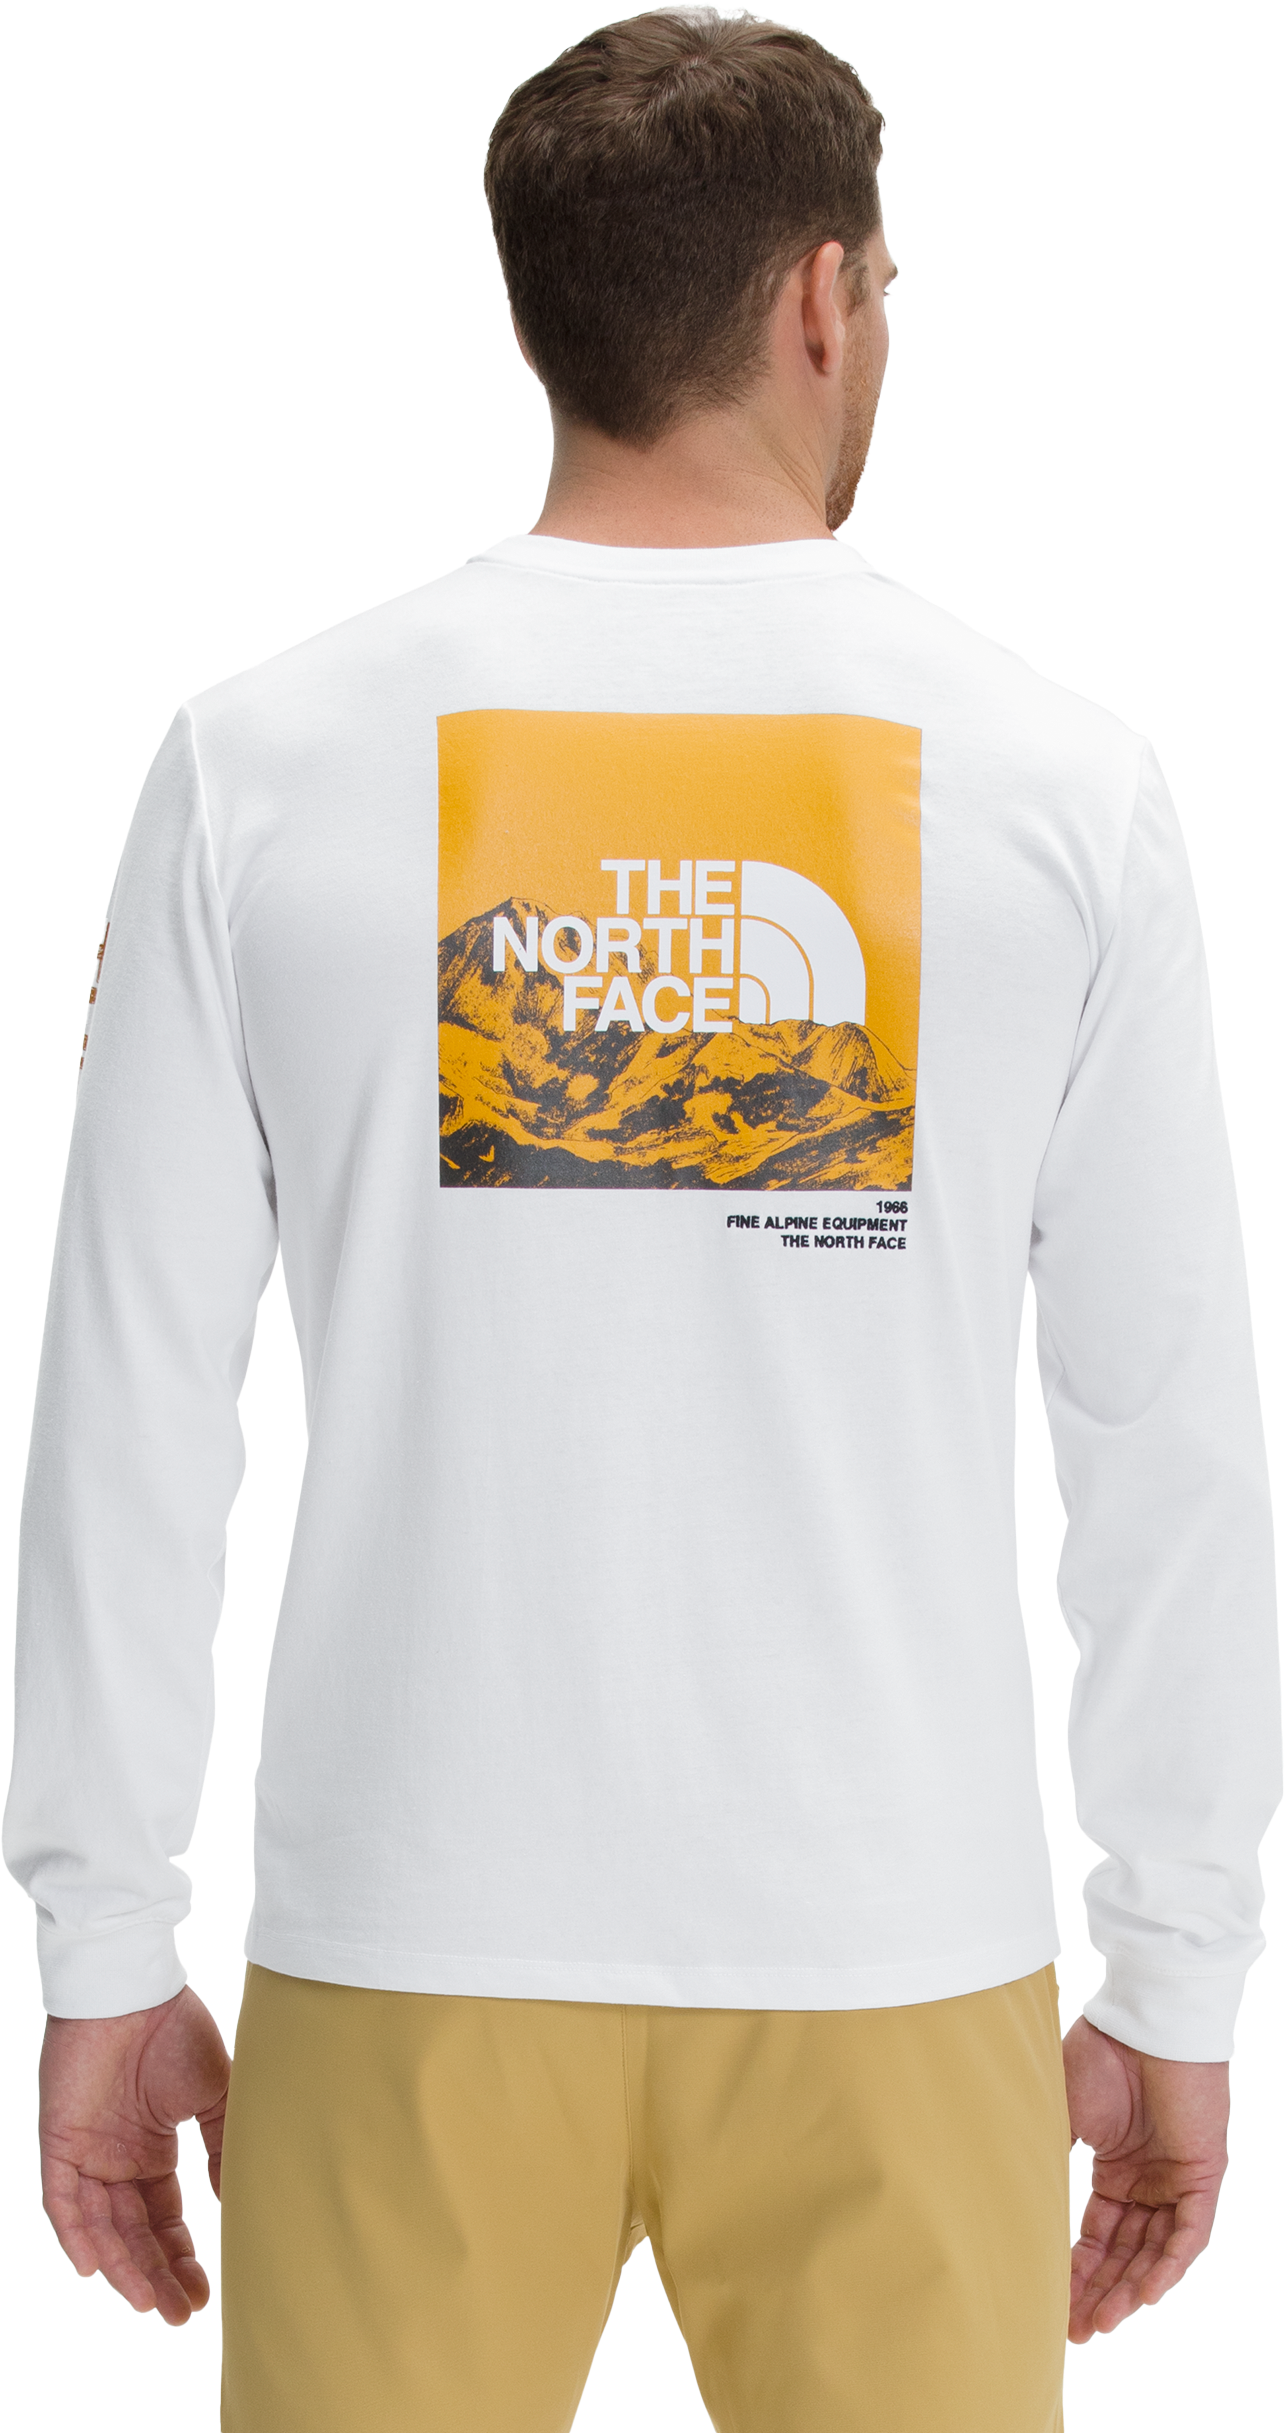 The North Face Logo Play Long-Sleeve T-Shirt for Men - TNF White - XL